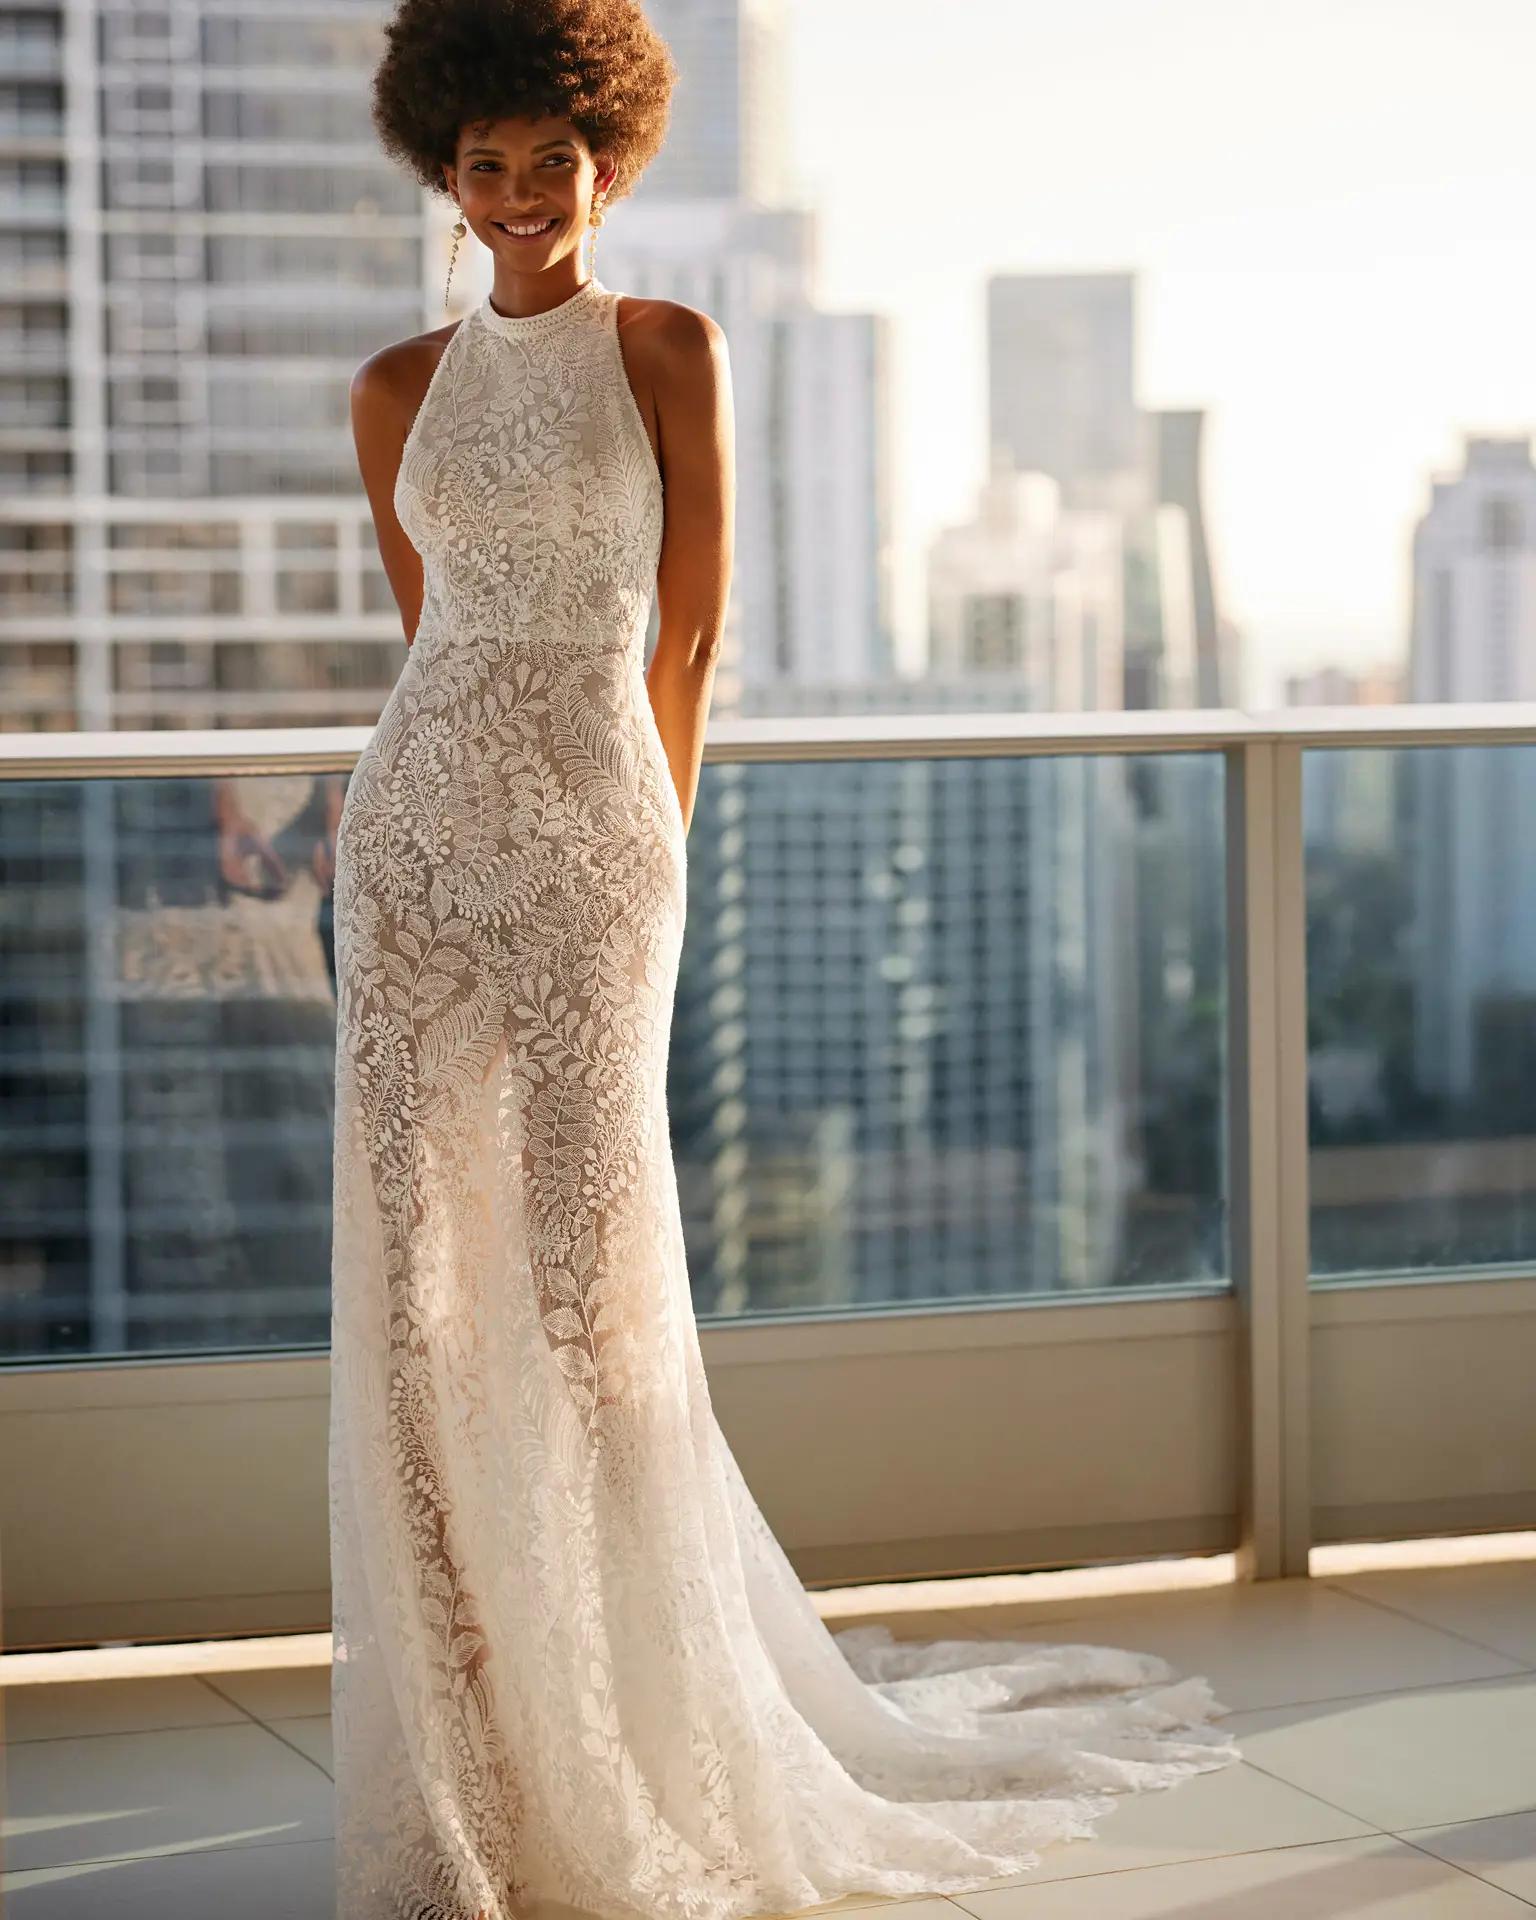 High neck wedding dress in Columbus, Ohio by Rosa Clara style Kloe with embroidered lace and open back and fitted silhouette